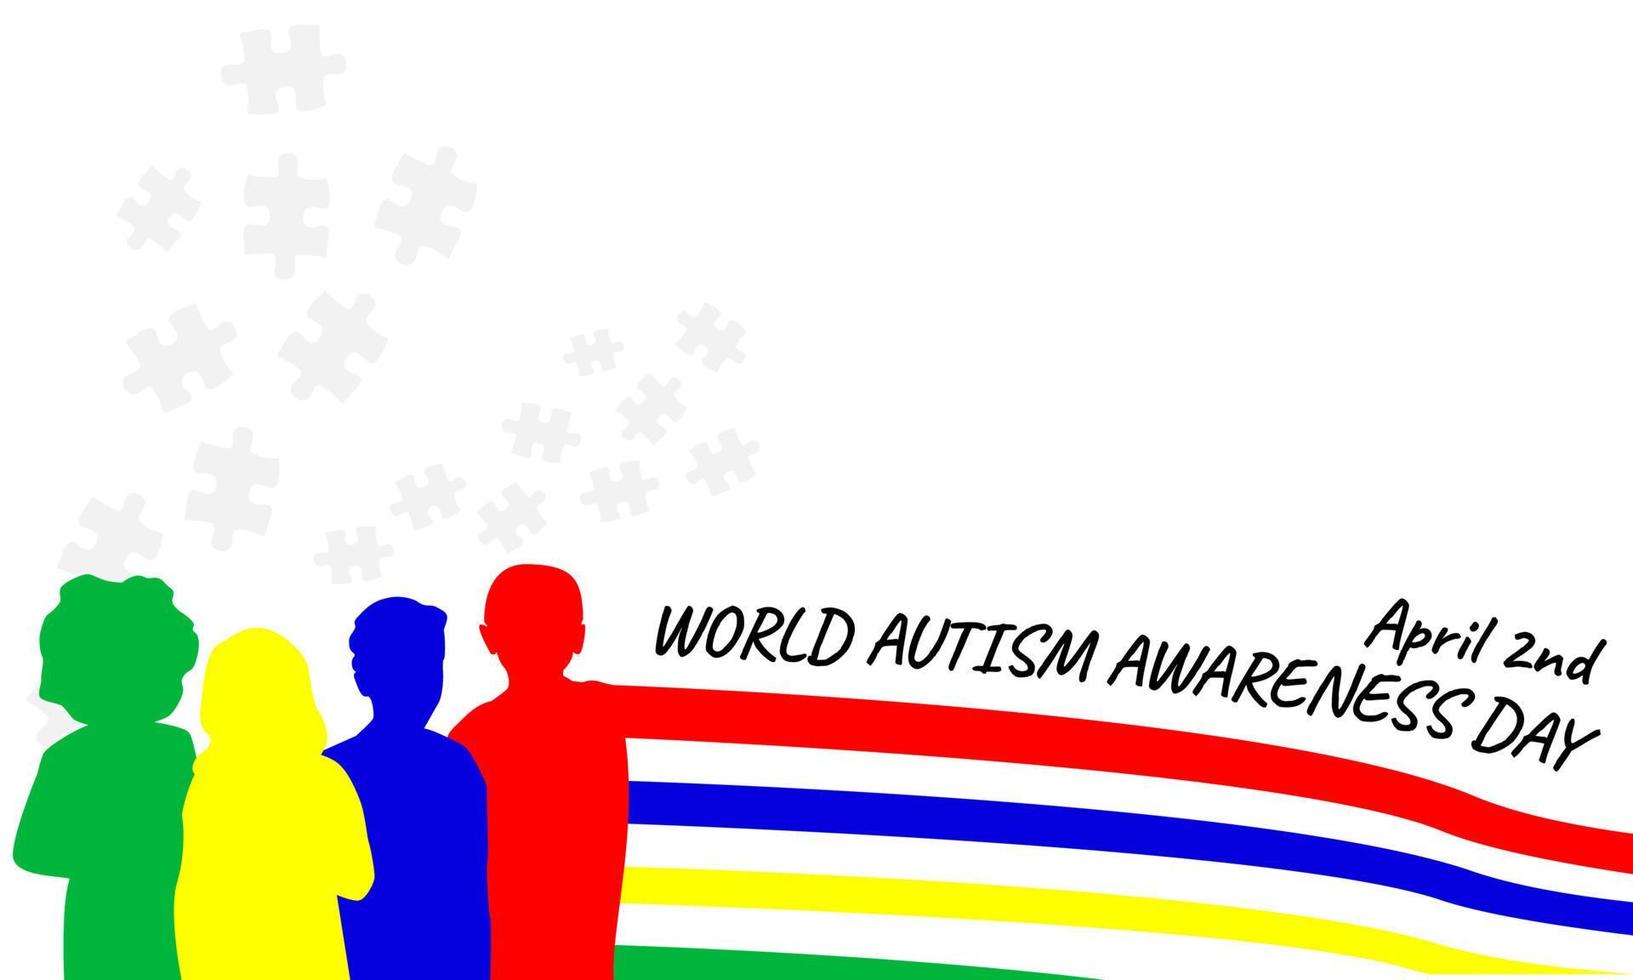 World autism awareness day poster. vector